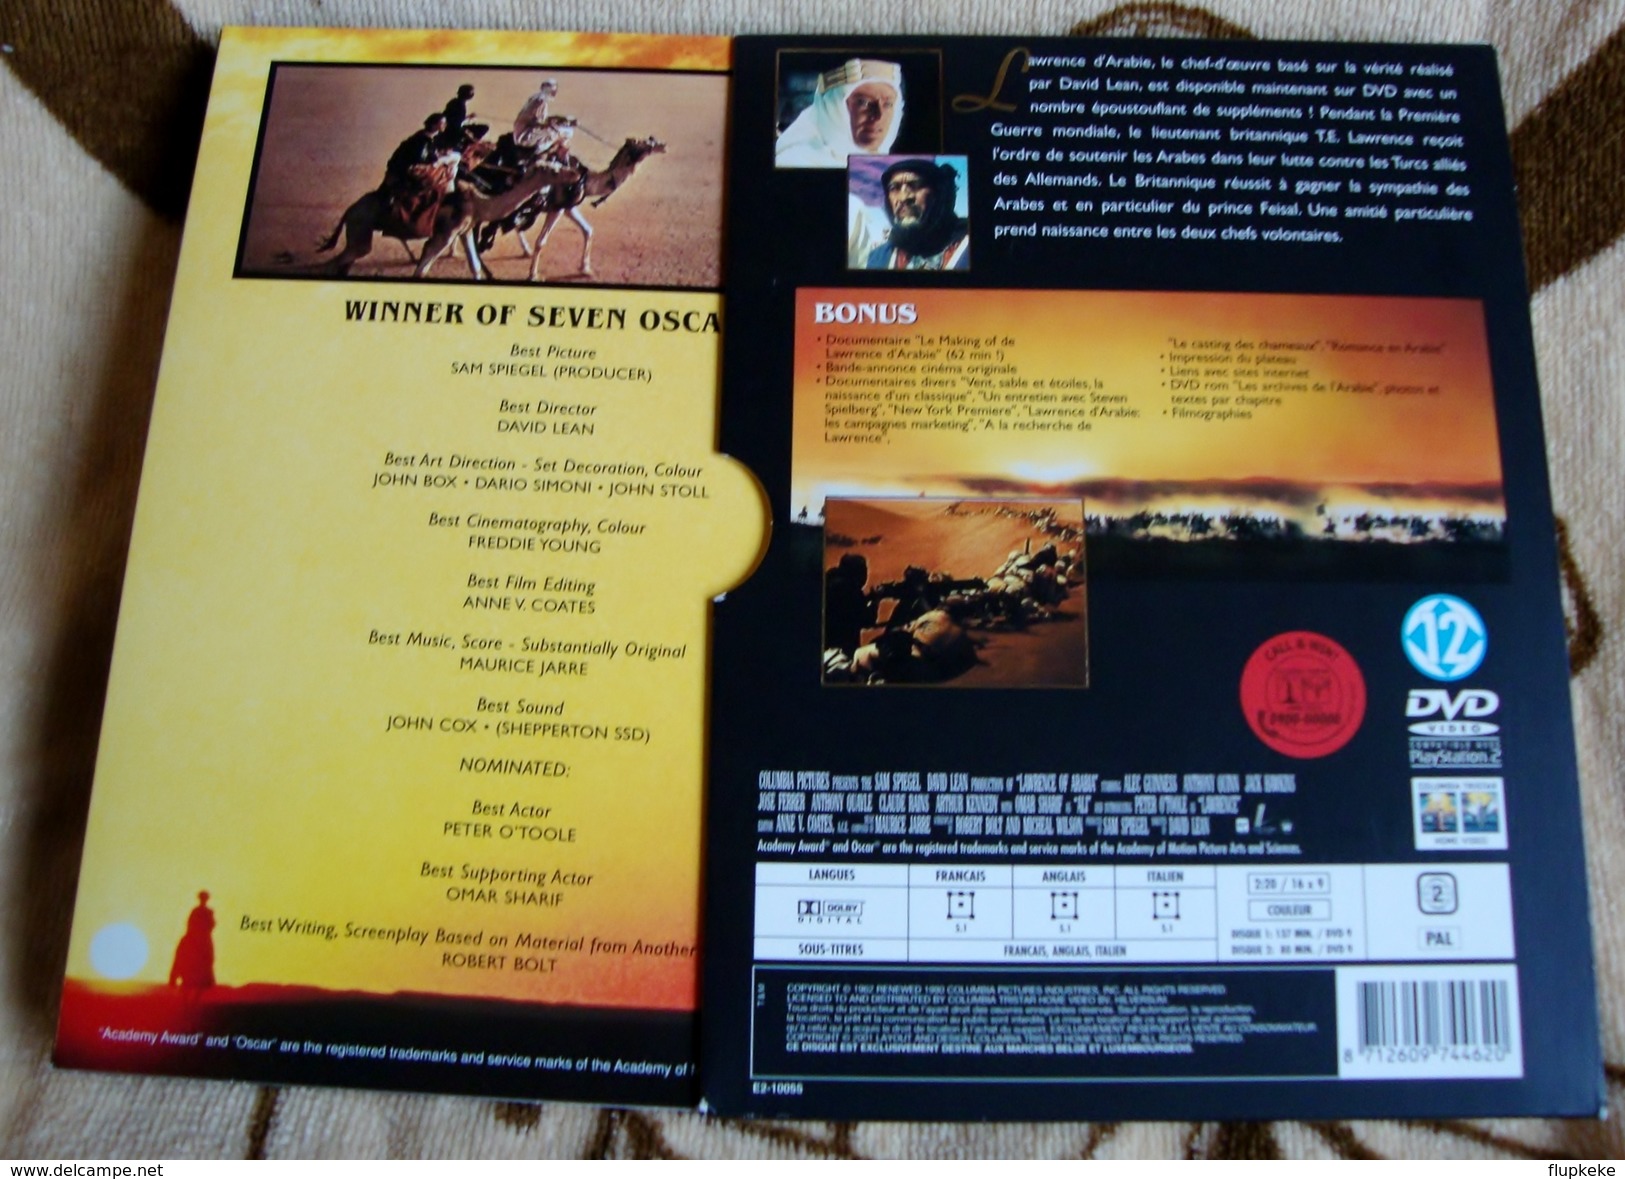 Dvd Zone 2 Lawrence D'Arabie (1962) Special Two Discs Limited Edition Lawrence Of Arabia Vf+Vostfr - History